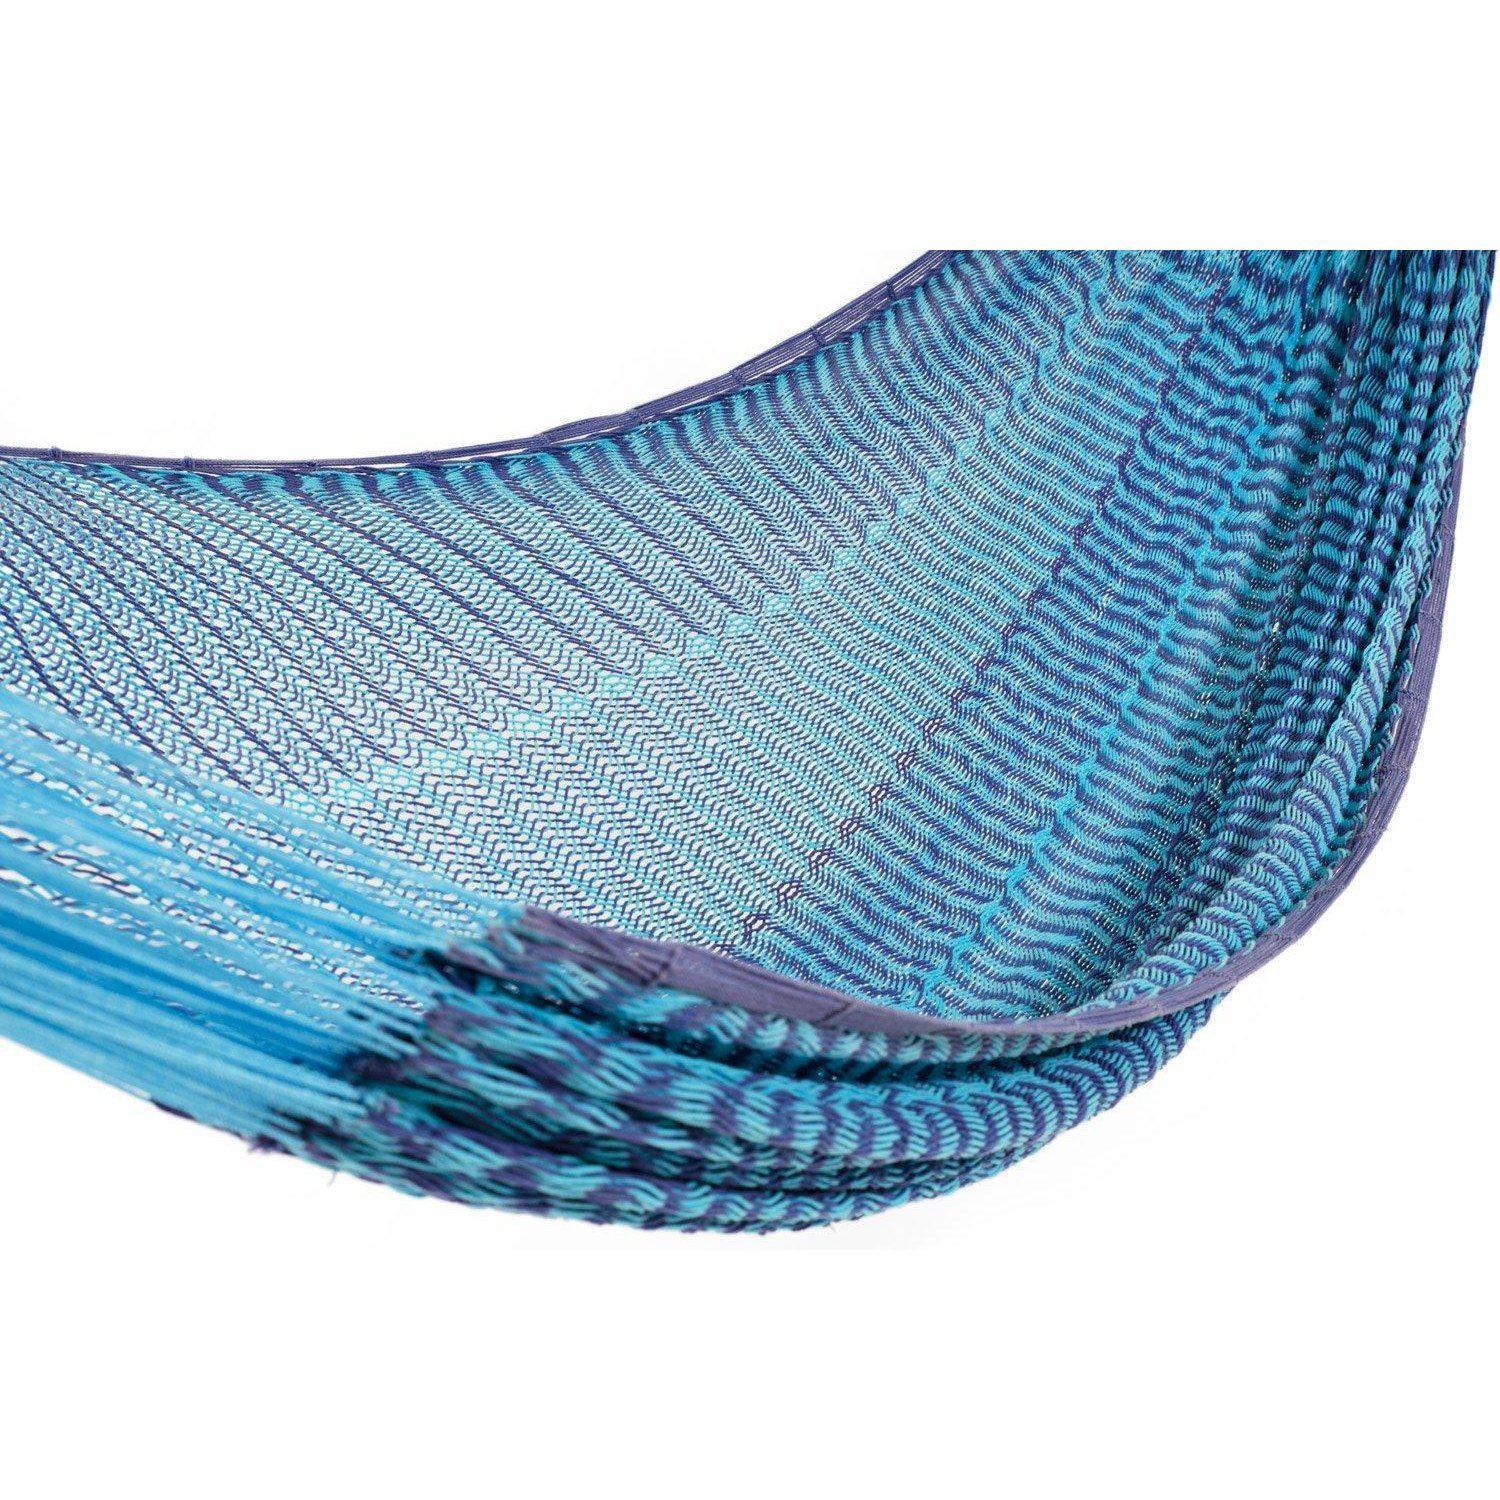 Deluxe Thick Weaved Mexican Hammock Cotton Two Tone Blue-Mexican Hammock-Hammock Heaven